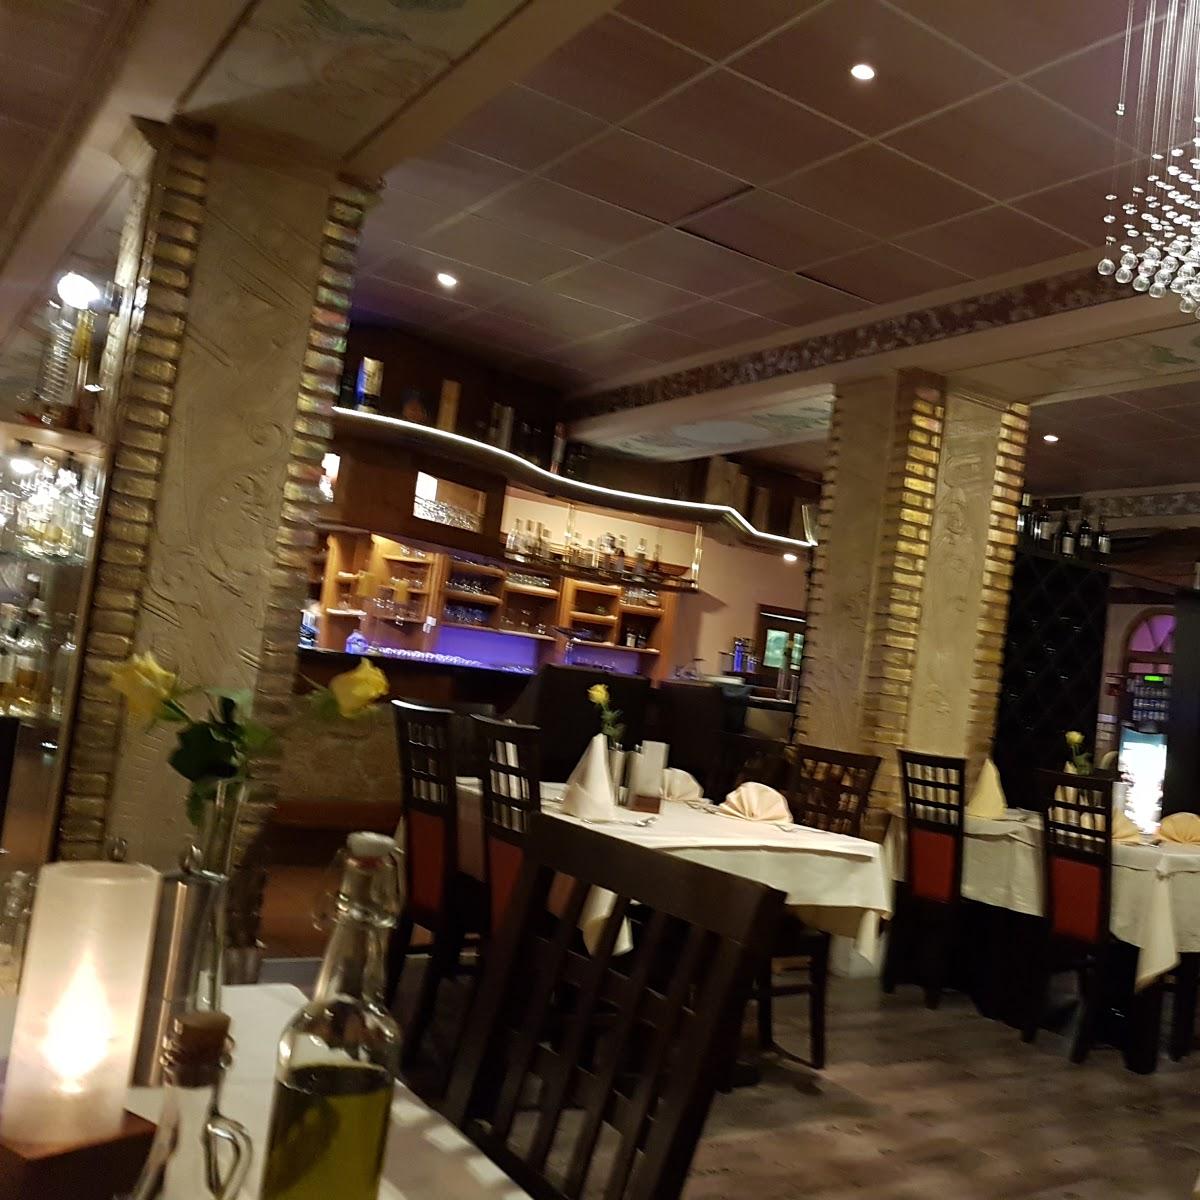 Restaurant "Le Donne Fausto" in Gifhorn